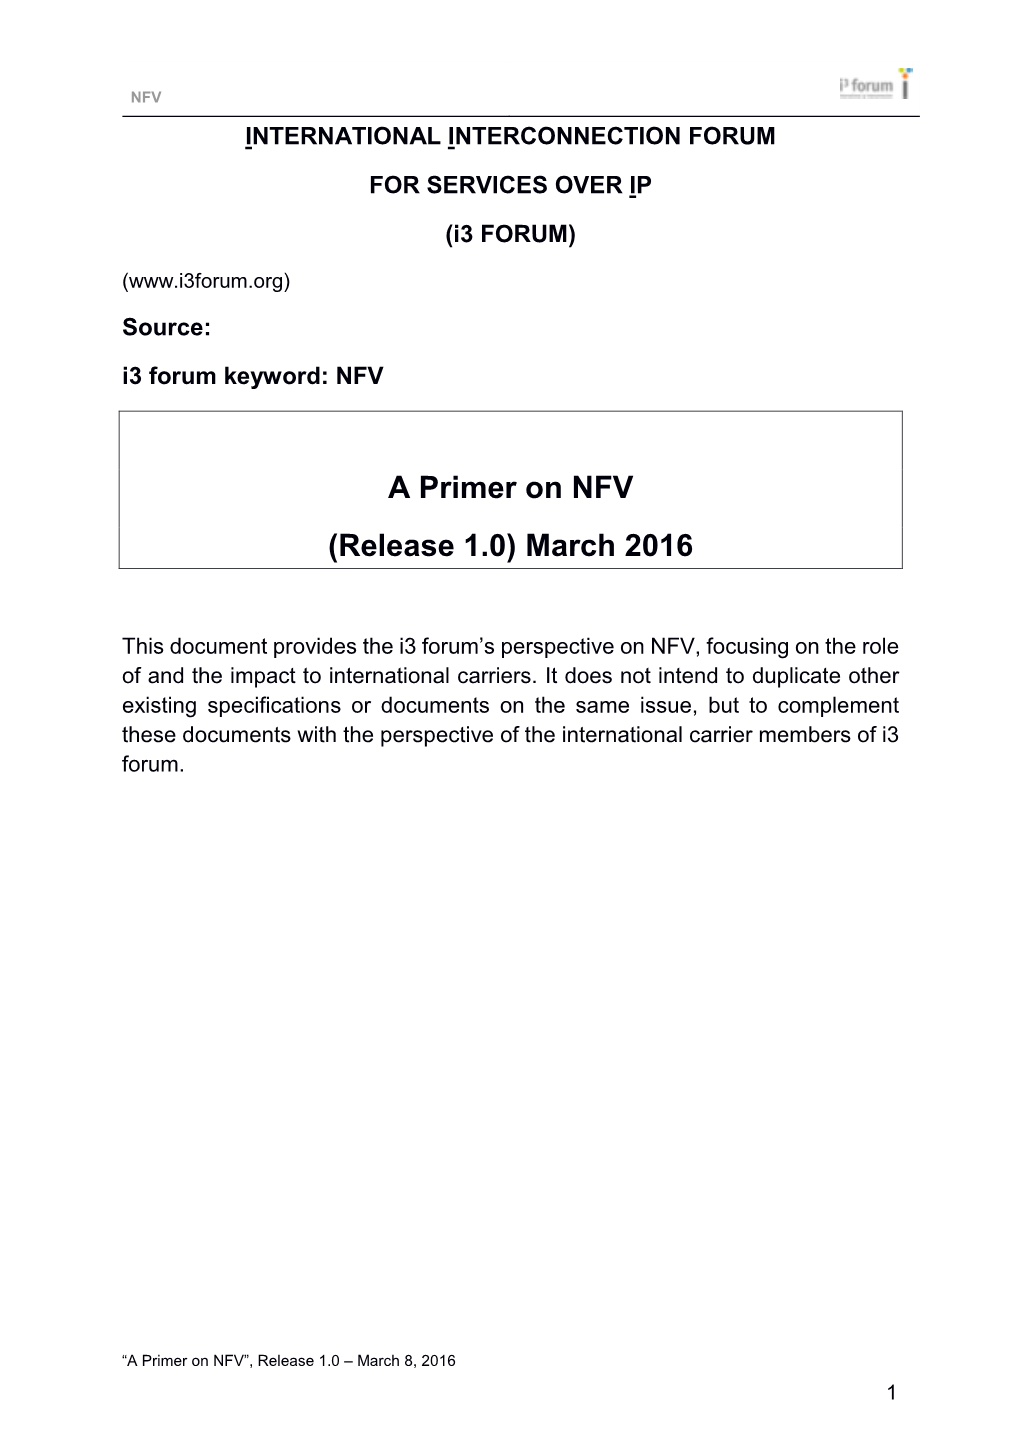 A Primer on NFV (Release 1.0) March 2016